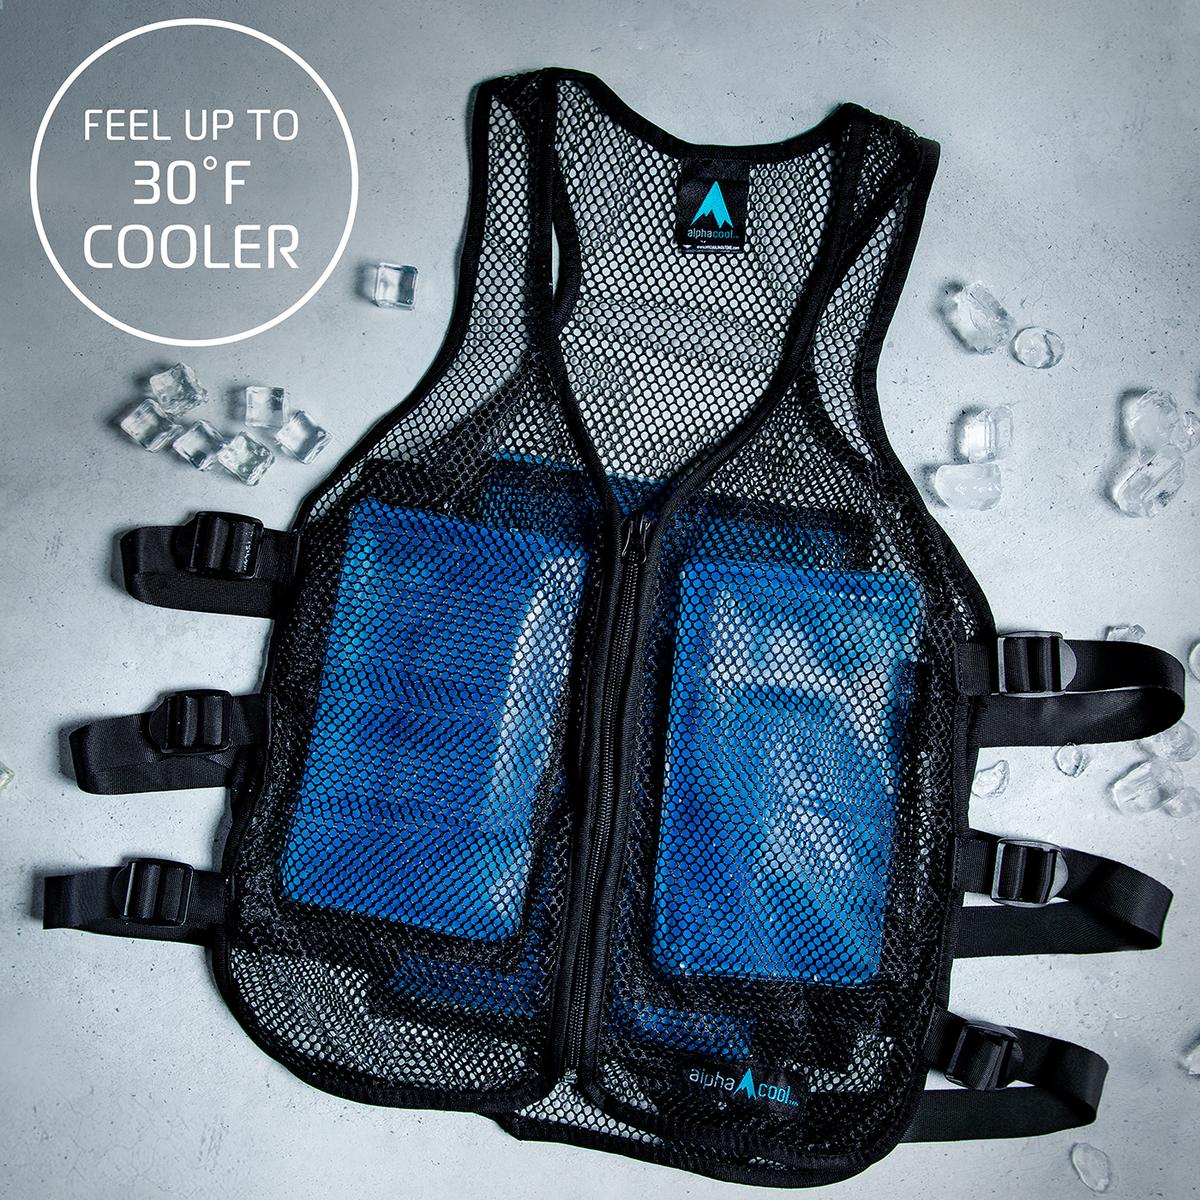 AlphaCool 12V Motorcycle Circulatory Cooling Vest System - The Warming Store